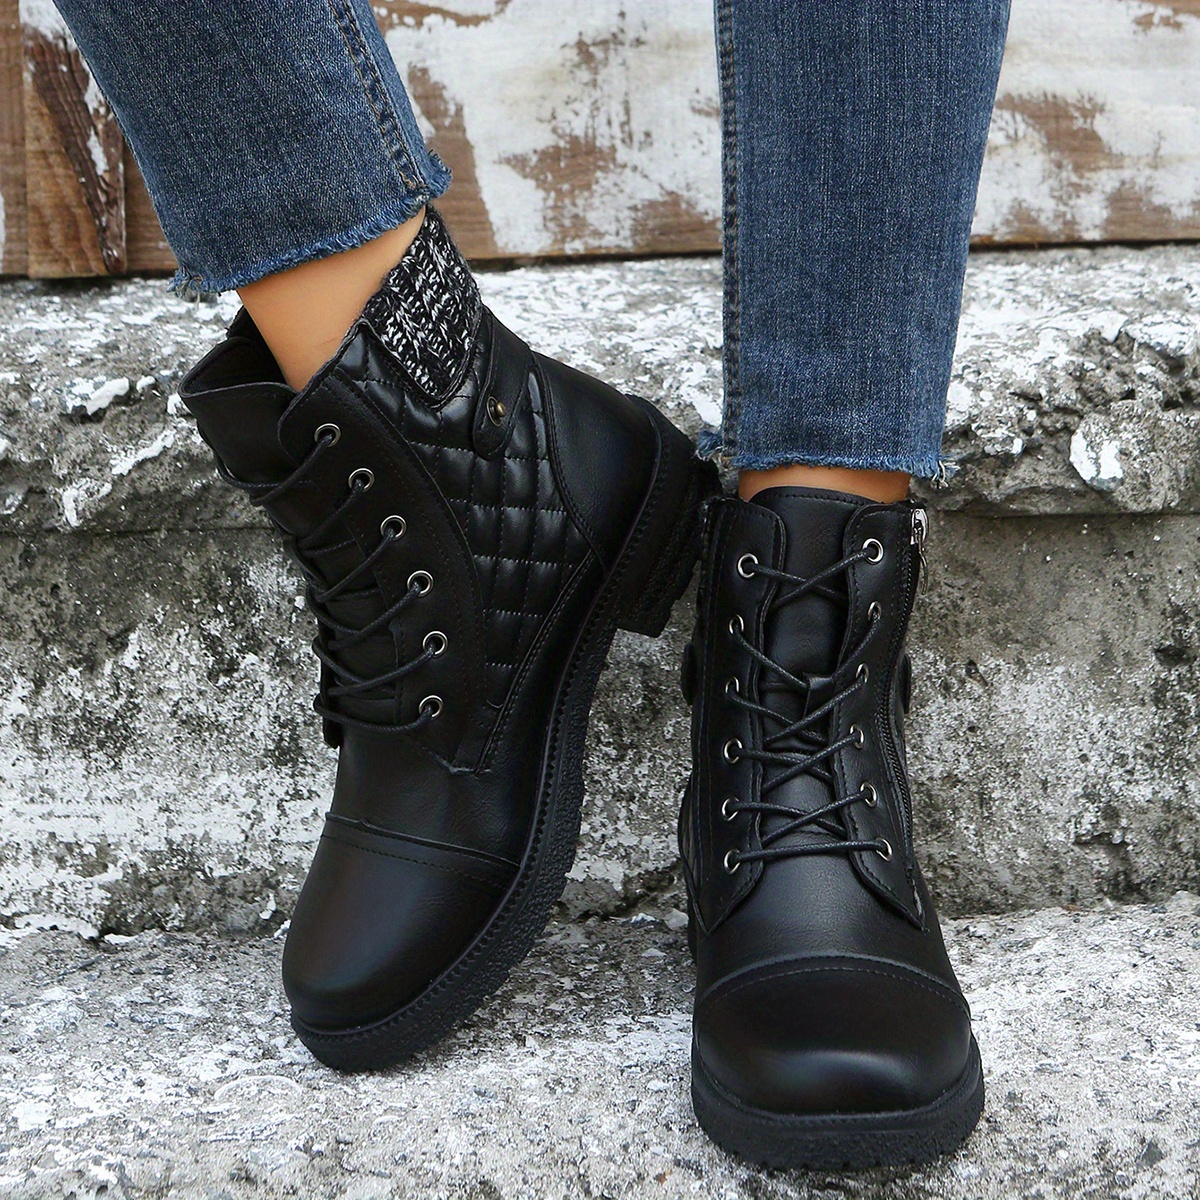 Mossimo Women's Lace Up Combat Boots with Zipper